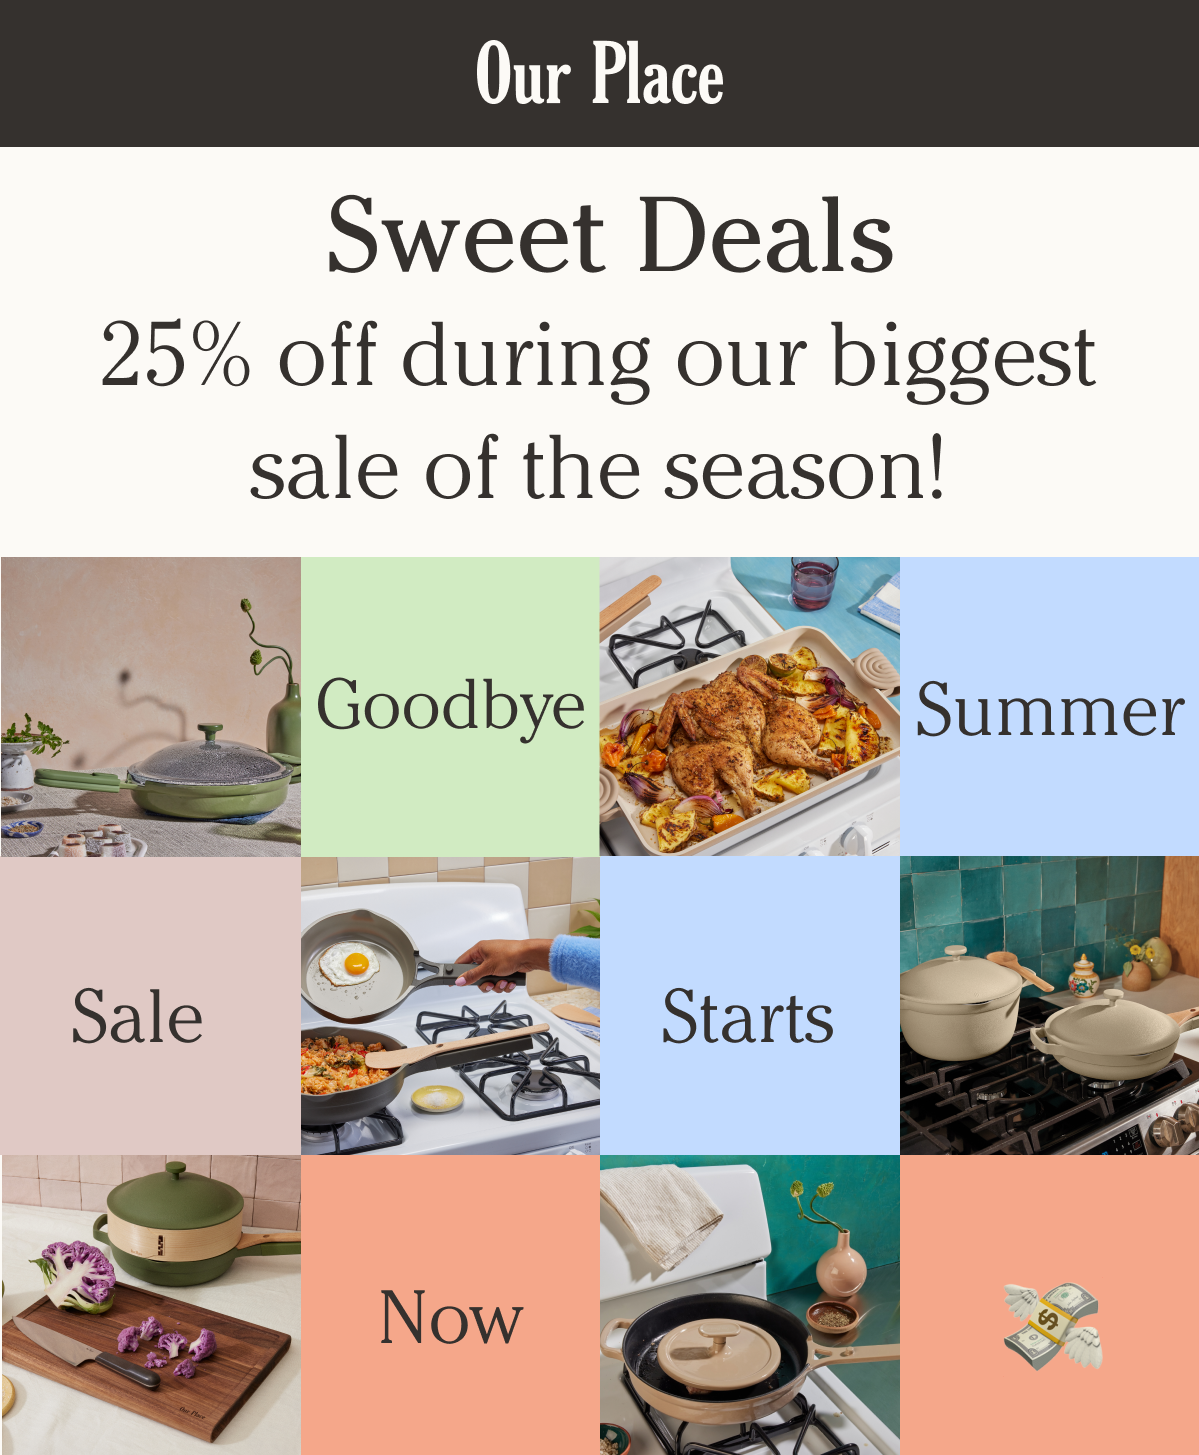 Our Place - Sweet Deals for VIPs